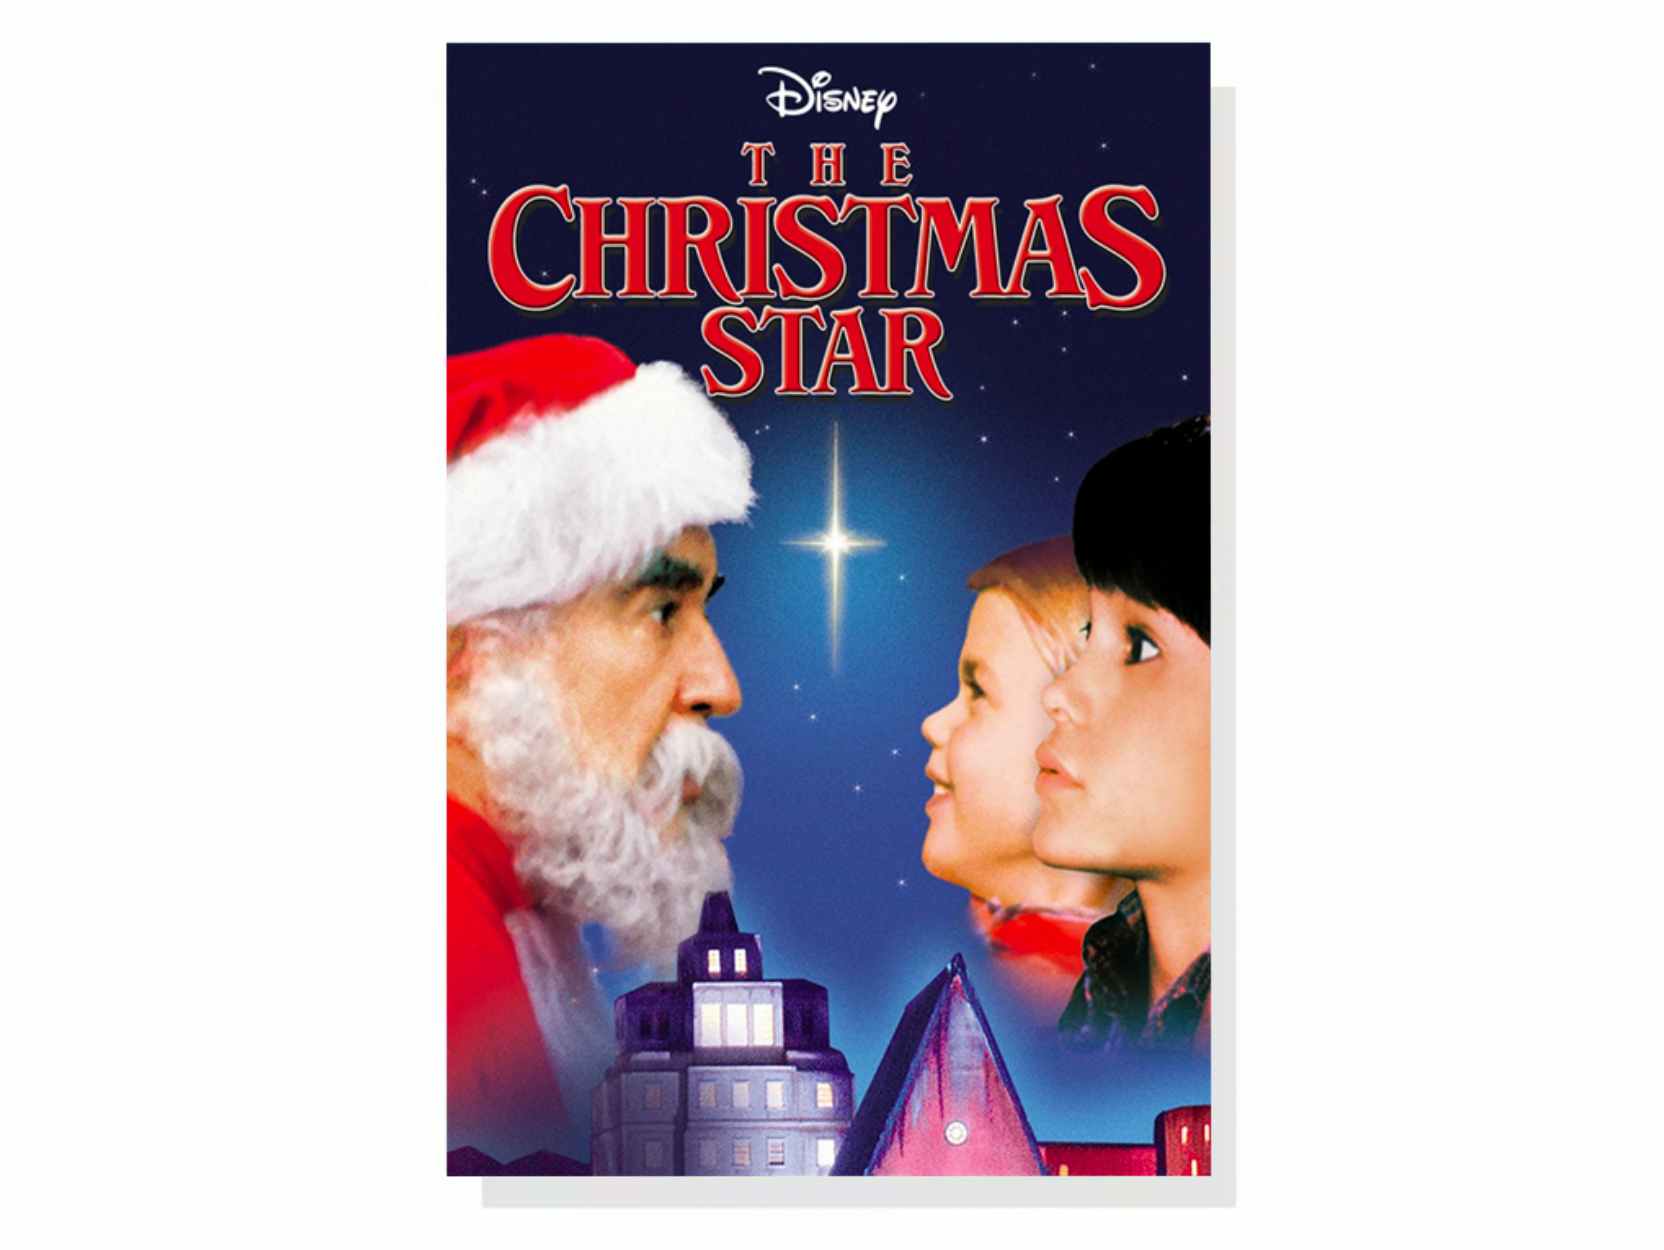 Movie poster for The Christmas Star, one of the best Christmas movies on Disney Plus.